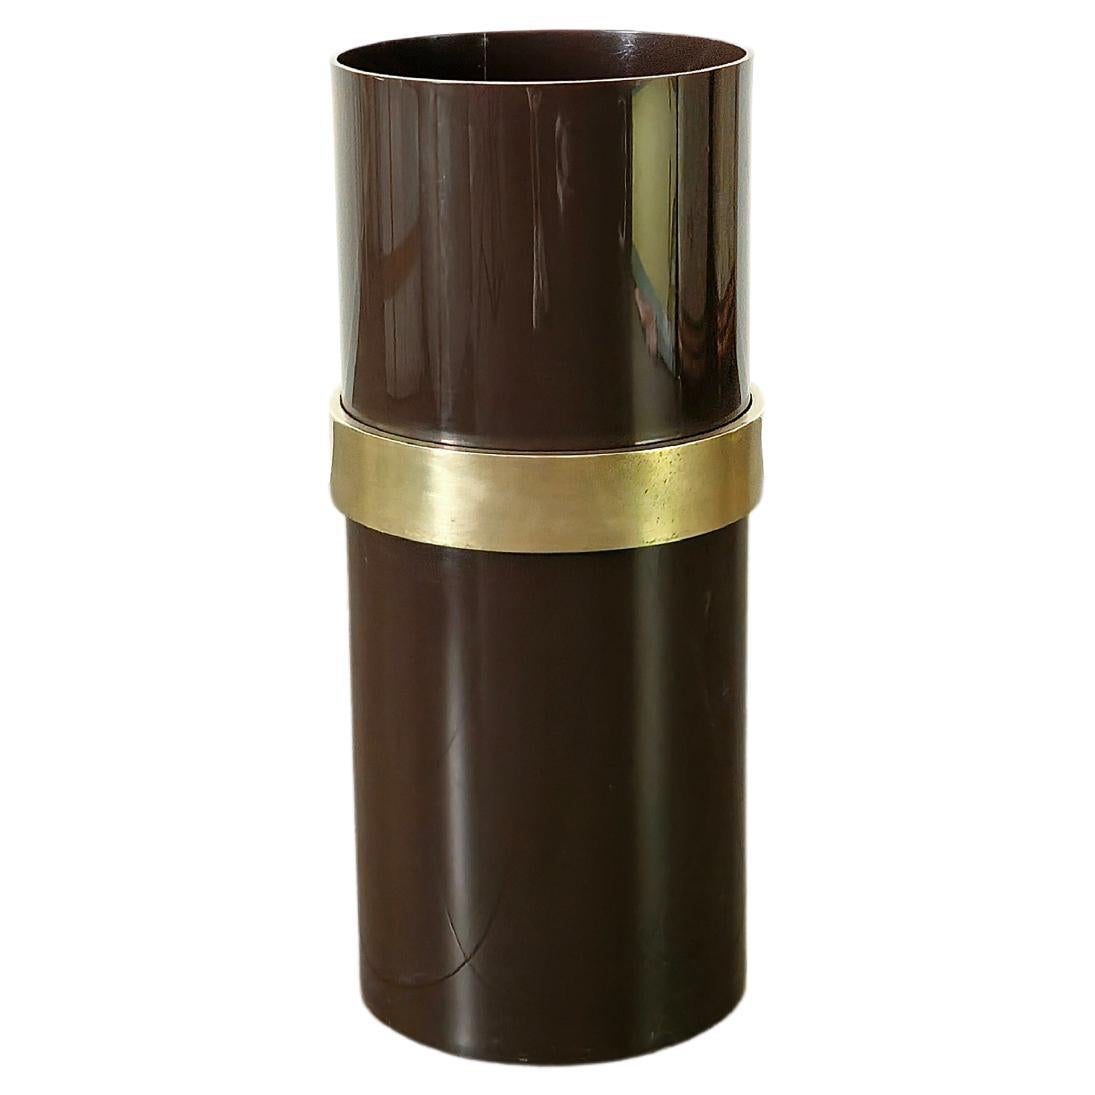 Midcentury Umbrella Stand Brown Plastic Brass Cylindrical Italian Design 1970s For Sale